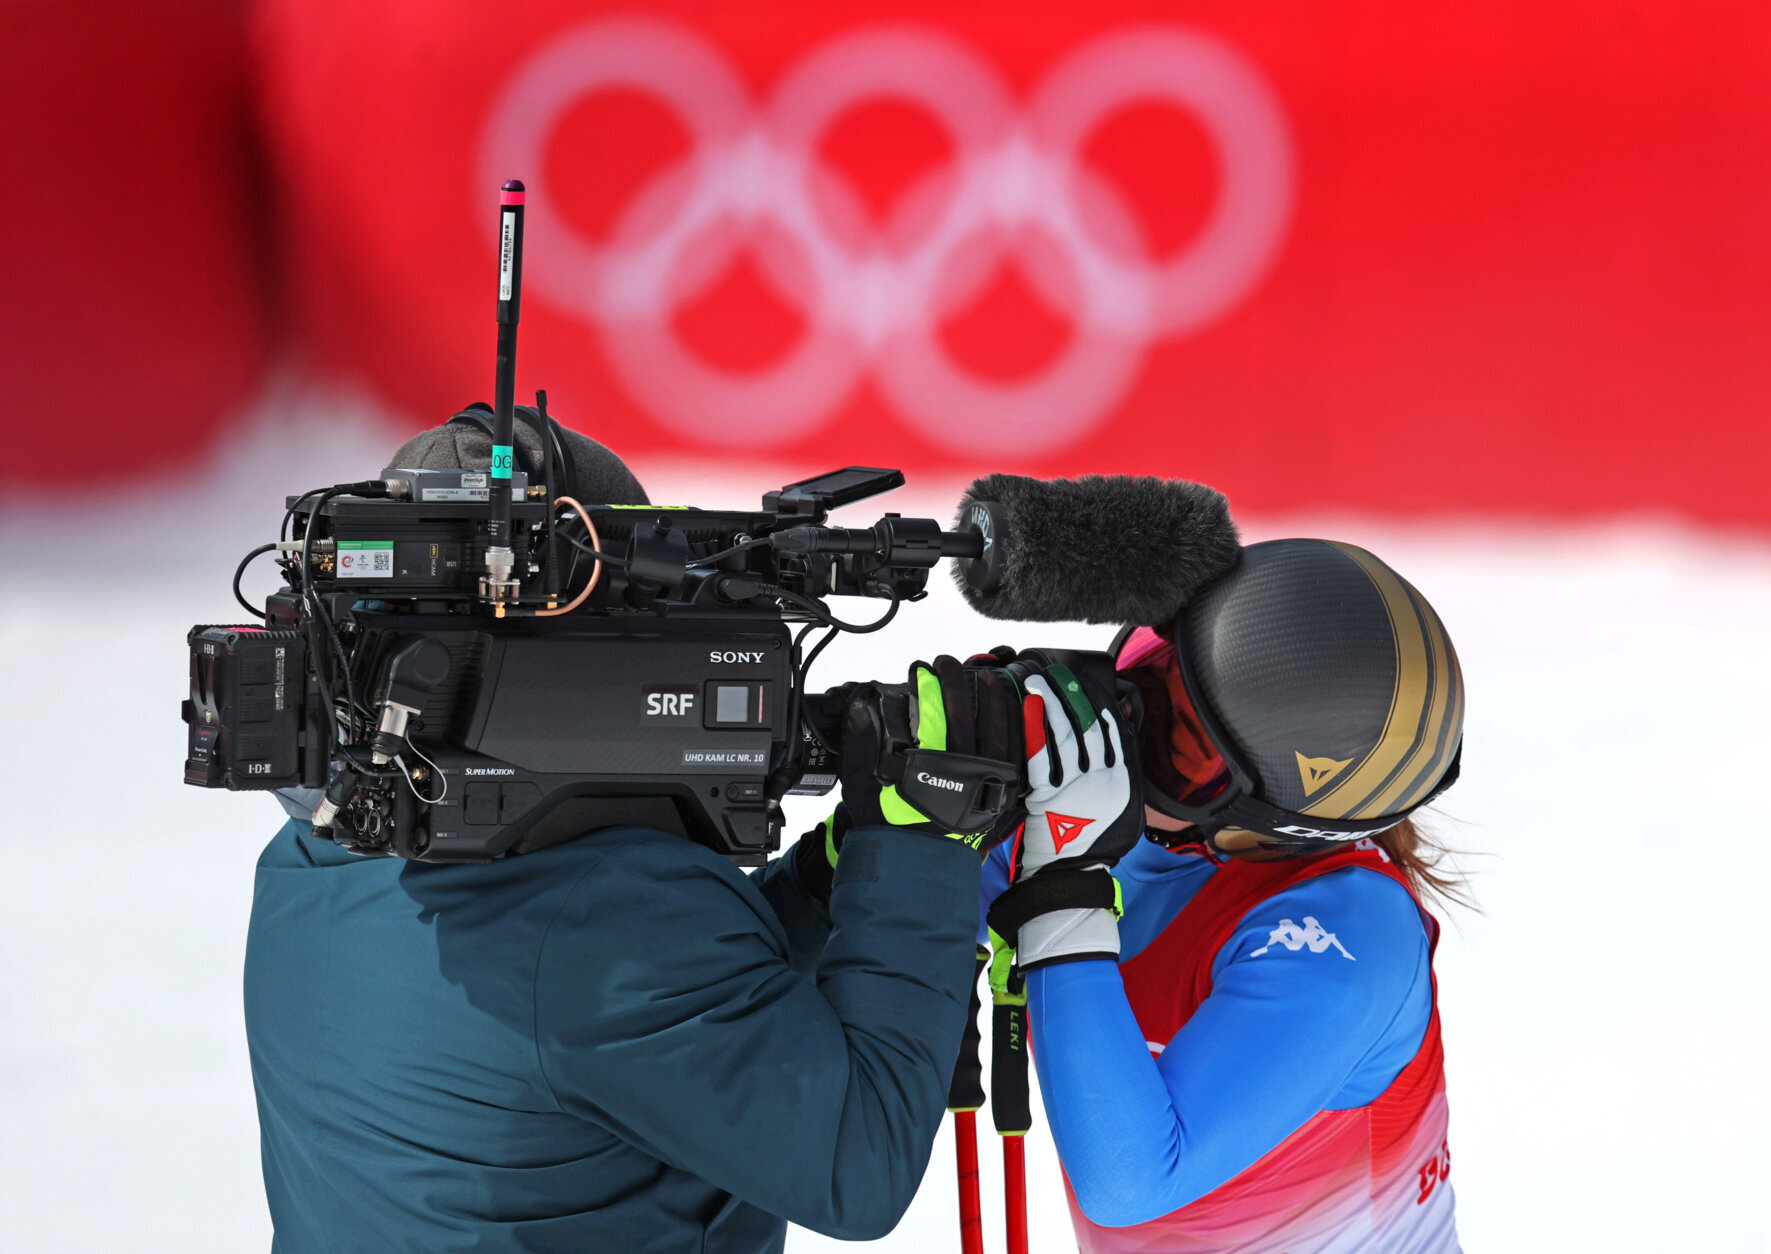 YANQING, CHINA - FEBRUARY 15: Sofia Goggia of Team Italy kisses a TV camera following her run during the Women's Downhill on day 11 of the Beijing 2022 Winter Olympic Games at National Alpine Ski Centre on February 15, 2022 in Yanqing, China. (Photo by Alex Pantling/Getty Images)